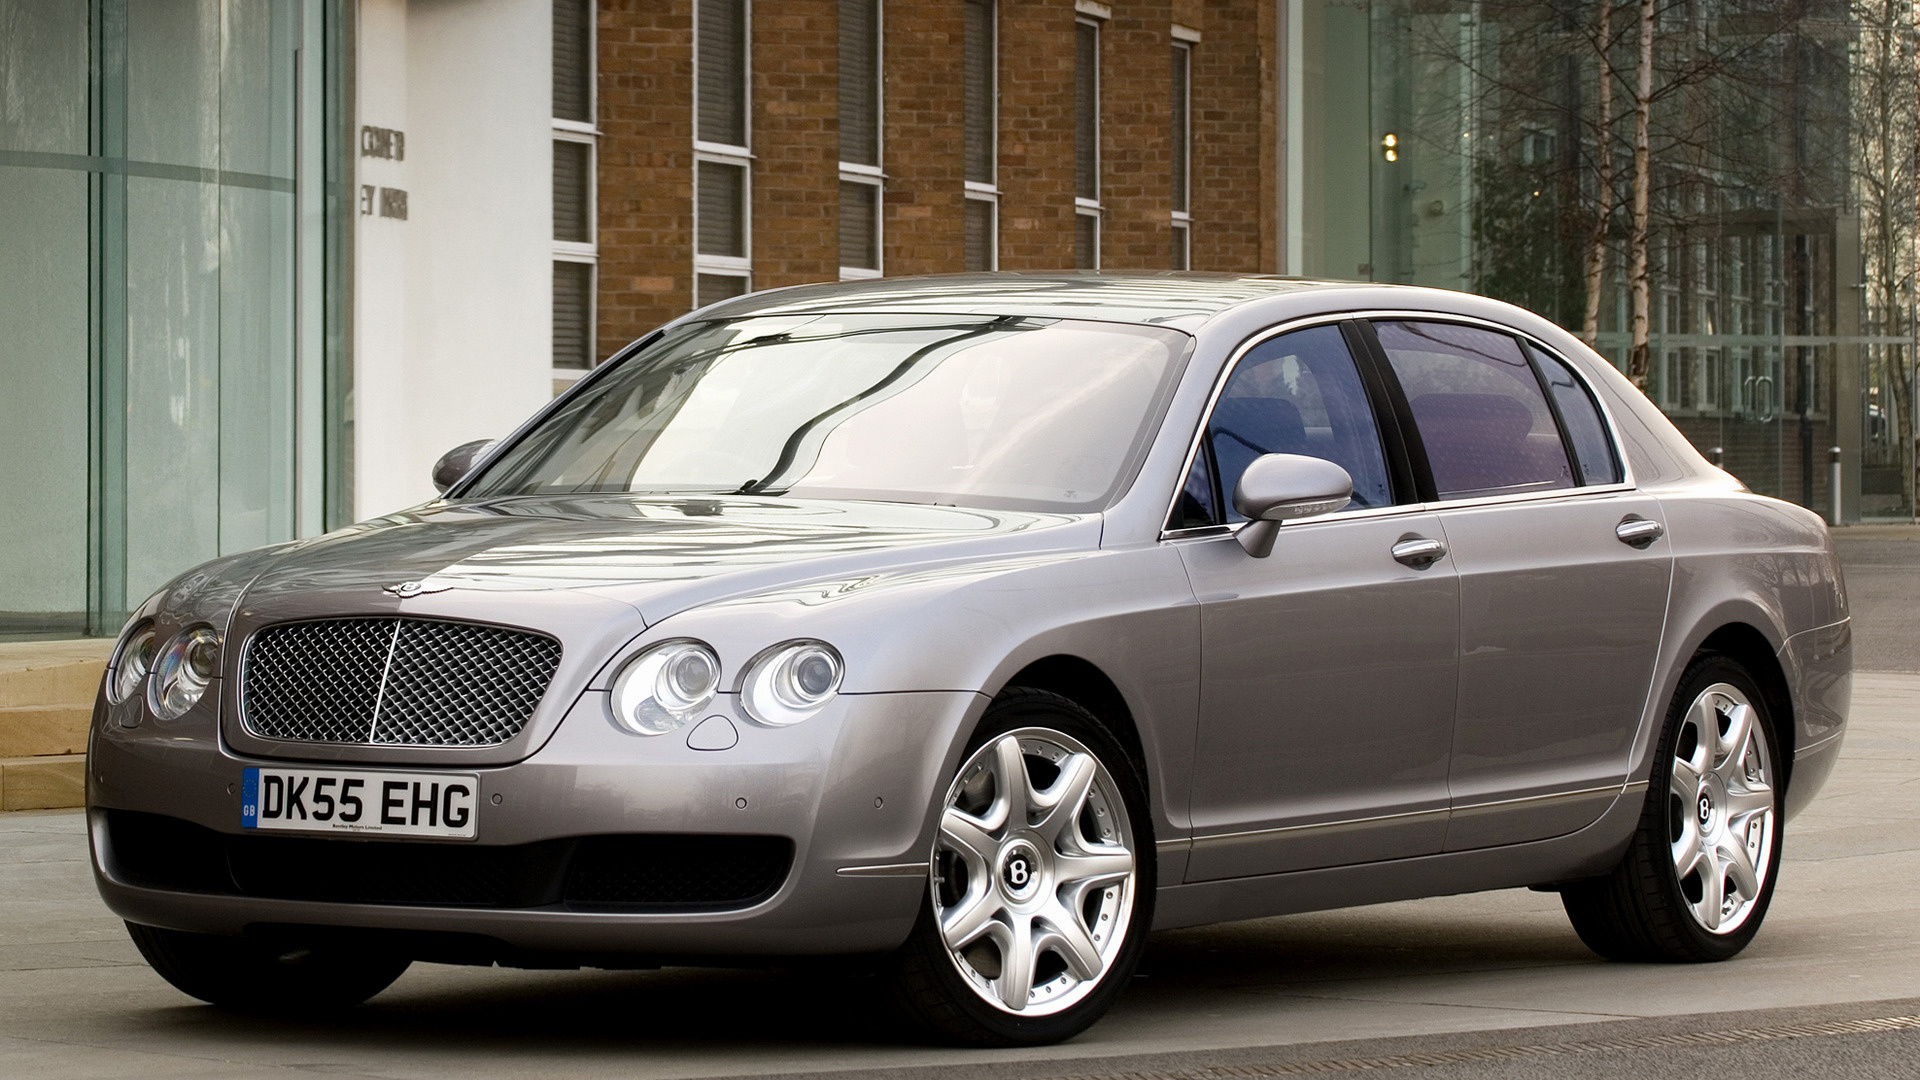 2005 Bentley Continental Flying Spur Hd Wallpaper Background Image 1920x1080